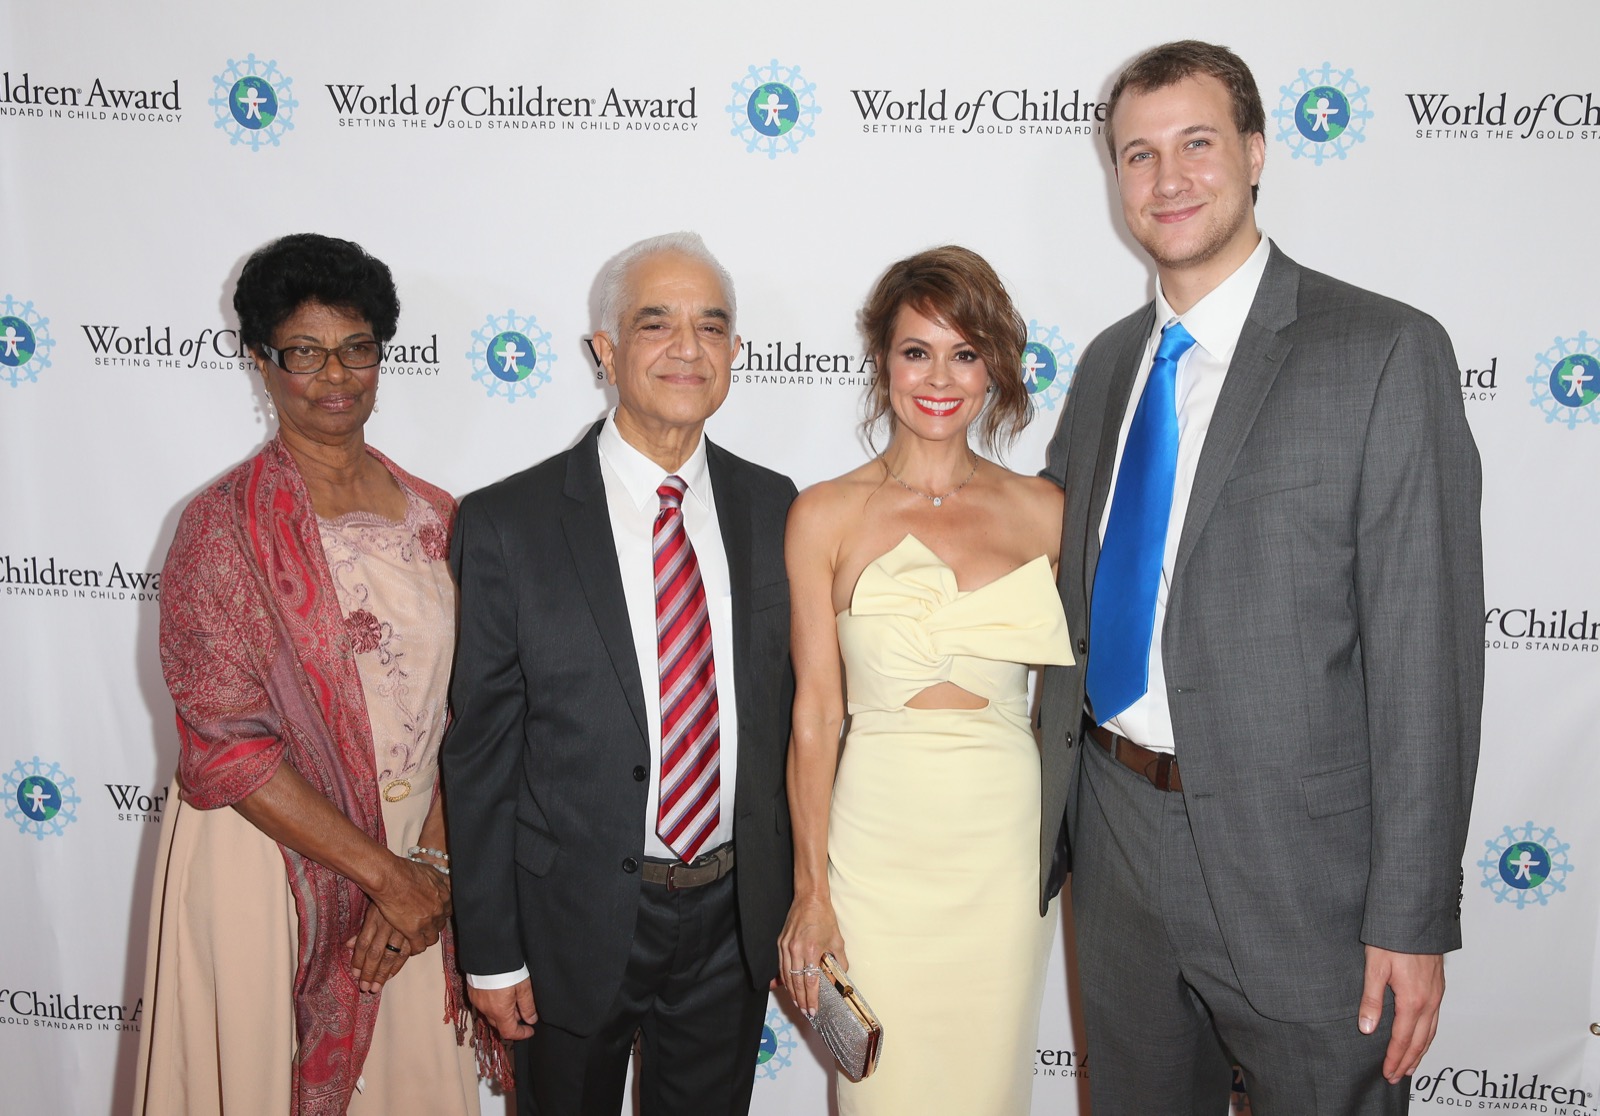 BEVERLY HILLS, CALIFORNIA - APRIL 12: (L-R) 2016 Alumni Honoree, Director of Caminante Proyecto Educativo Denisse Pichardo, 2016 Alumni Honoree and Founding Chairman of the Hospital and Rehabilitation Center for Disabled Children Dr. Ashok Banskota, Emcee and CEO of ModernMom Brooke Burke-Charvet and 2016 Alumni Honoree Ryan Hreljac attend World Of Children Award 2016 Alumni Honors at Montage Beverly Hills on April 12, 2016 in Beverly Hills, California. (Photo by Joe Scarnici/Getty Images for World of Children)